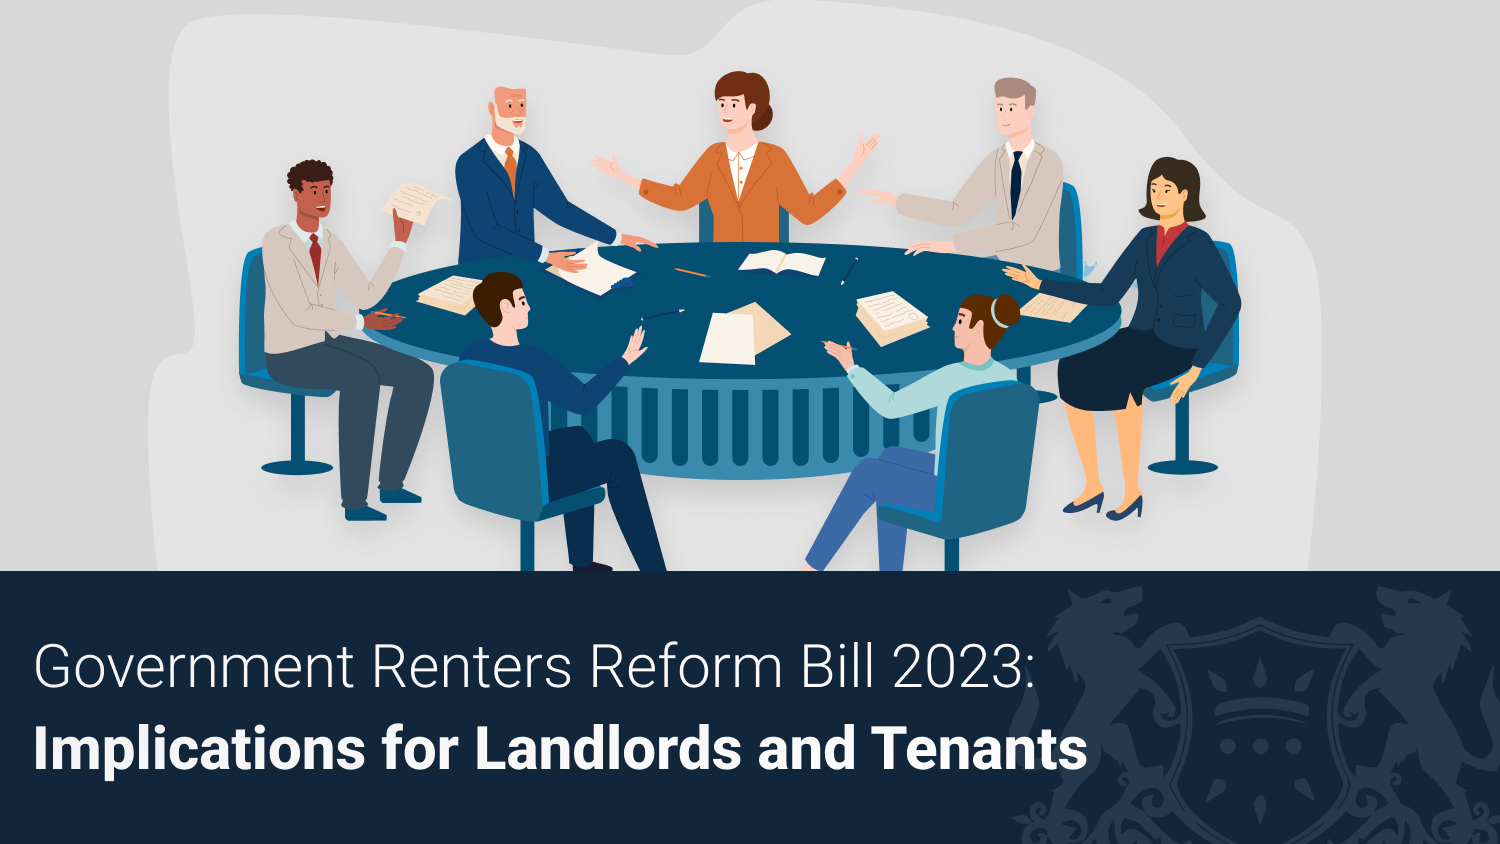 Government Renters Reform Bill 2023: Implications for Landlords and Tenants